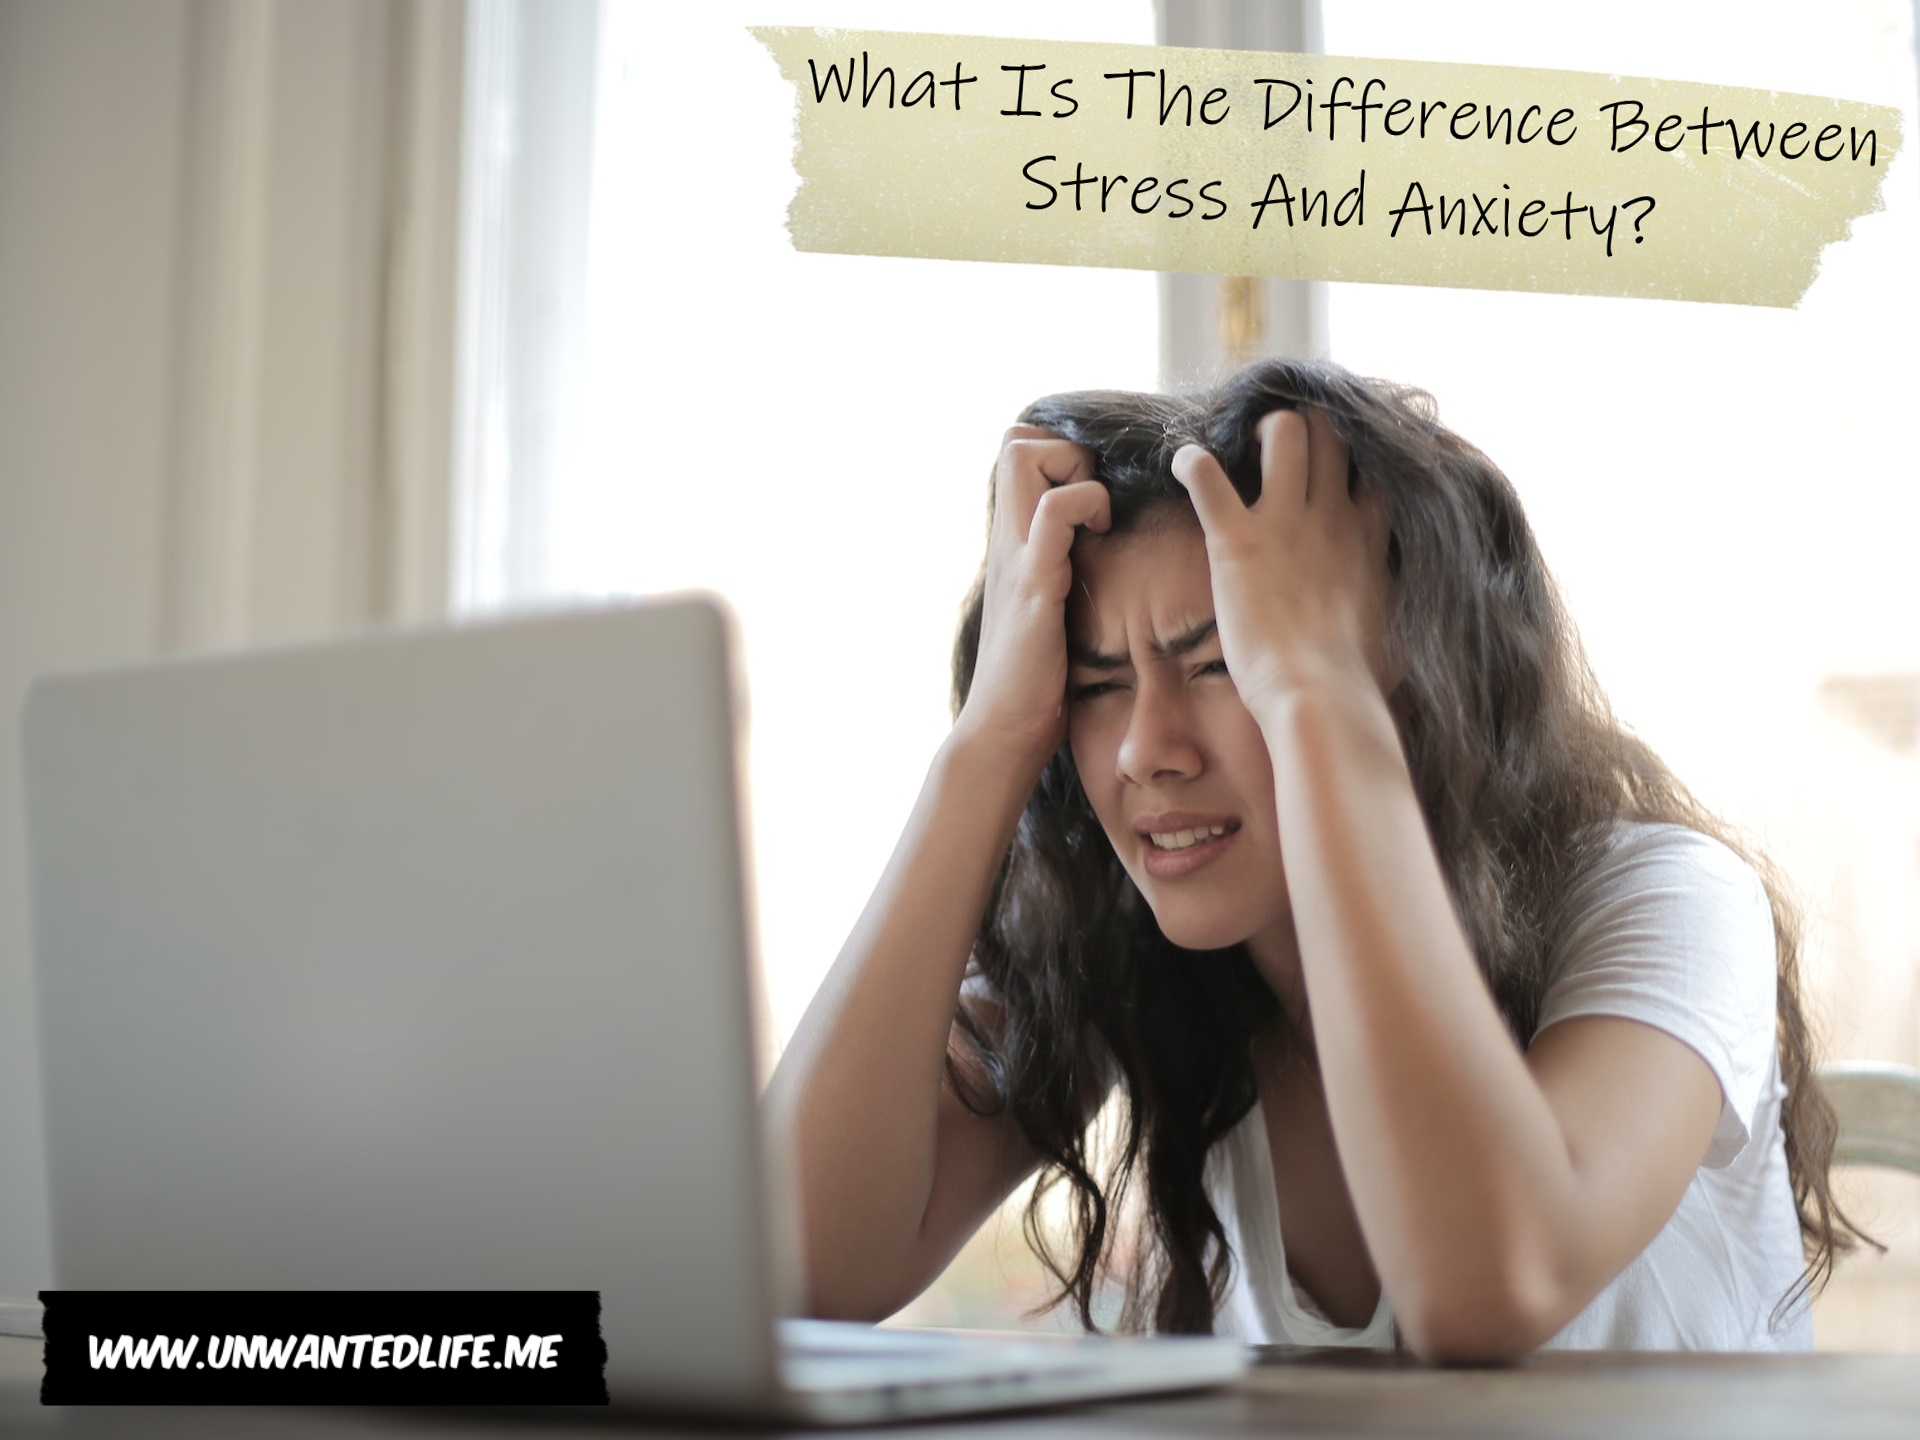 A photo of a woman looking anxious and stressed while leaning over their laptop to represent the topic of the article - What Is The Difference Between Stress And Anxiety?